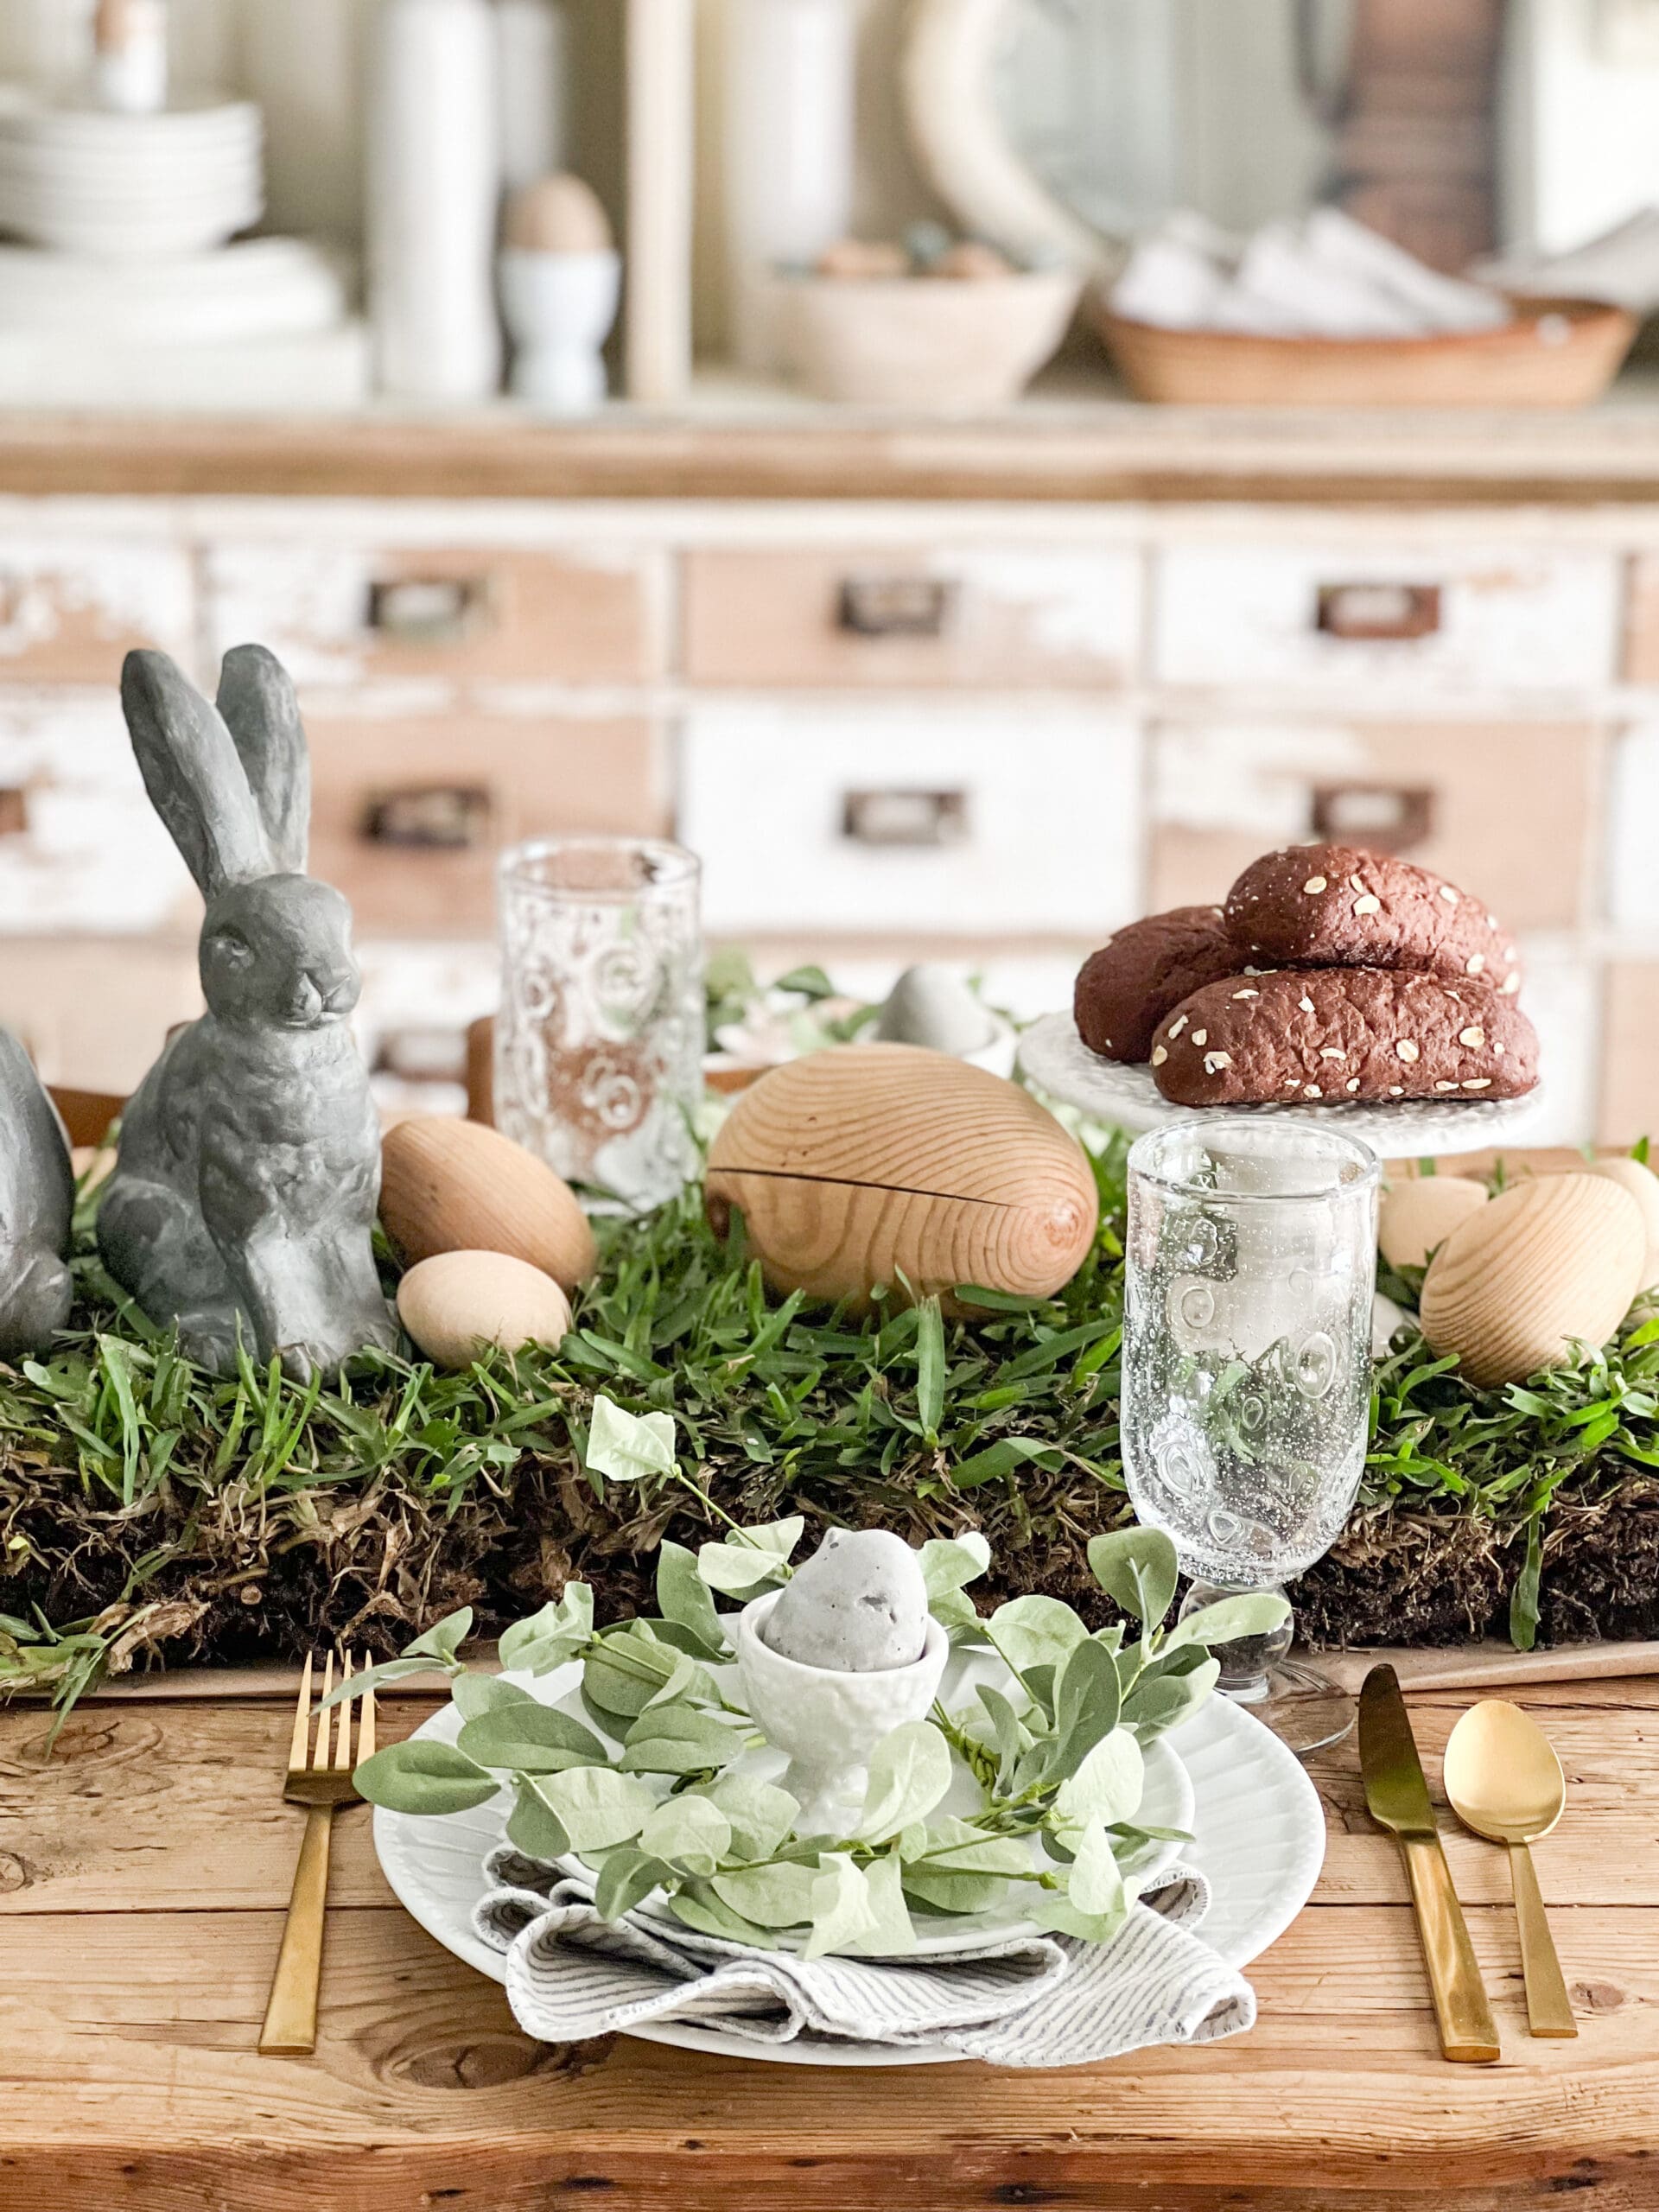 How to Make an Amazing Easter Tablescape with Neutral Colors